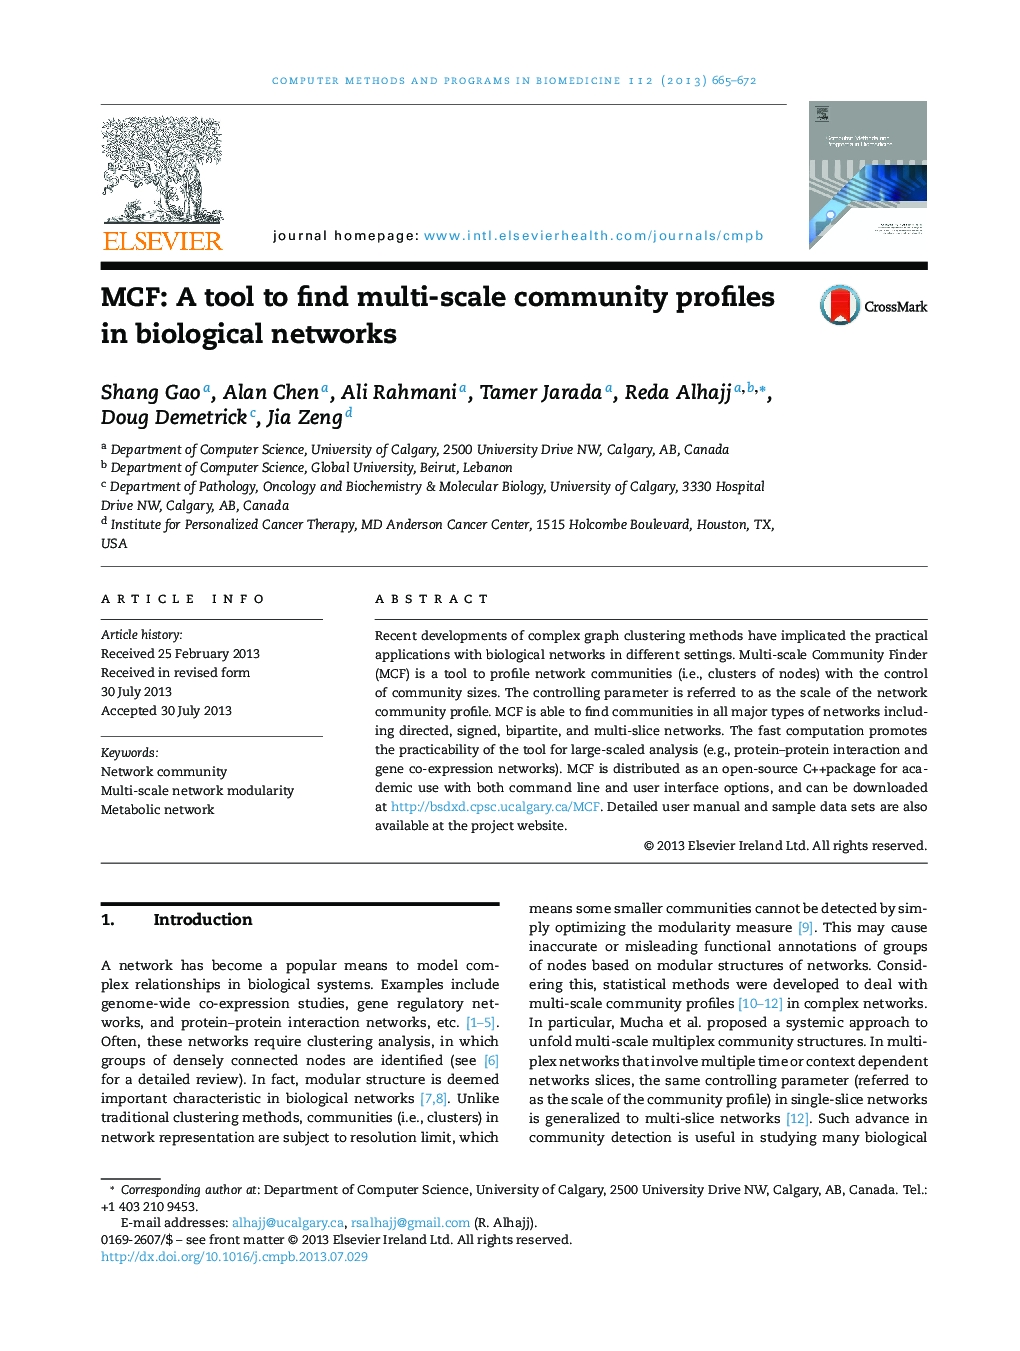 MCF: A tool to find multi-scale community profiles in biological networks